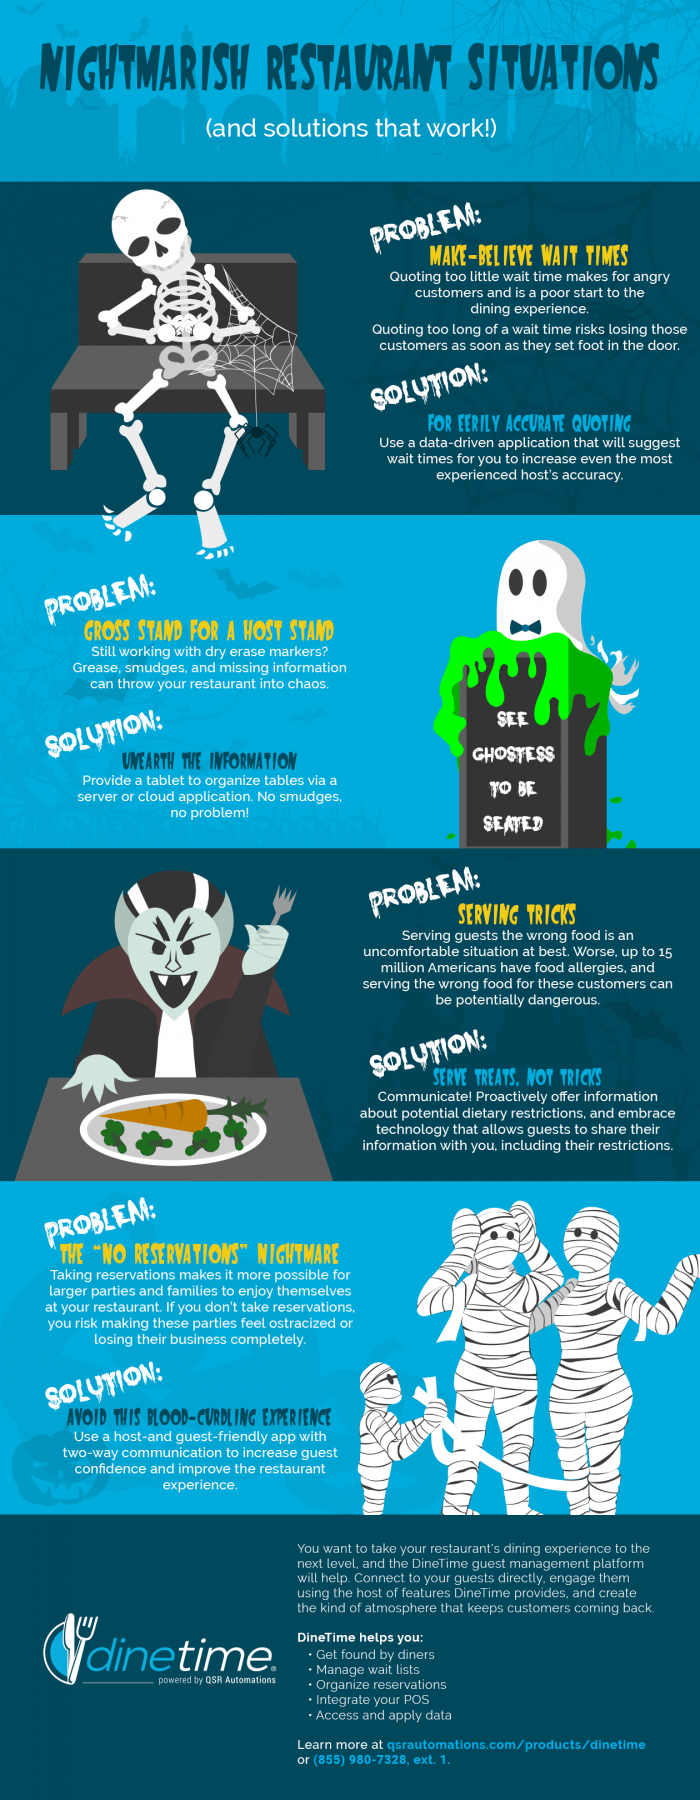 Halloween edition infographic about 4 common restaurant problems and solutions to them